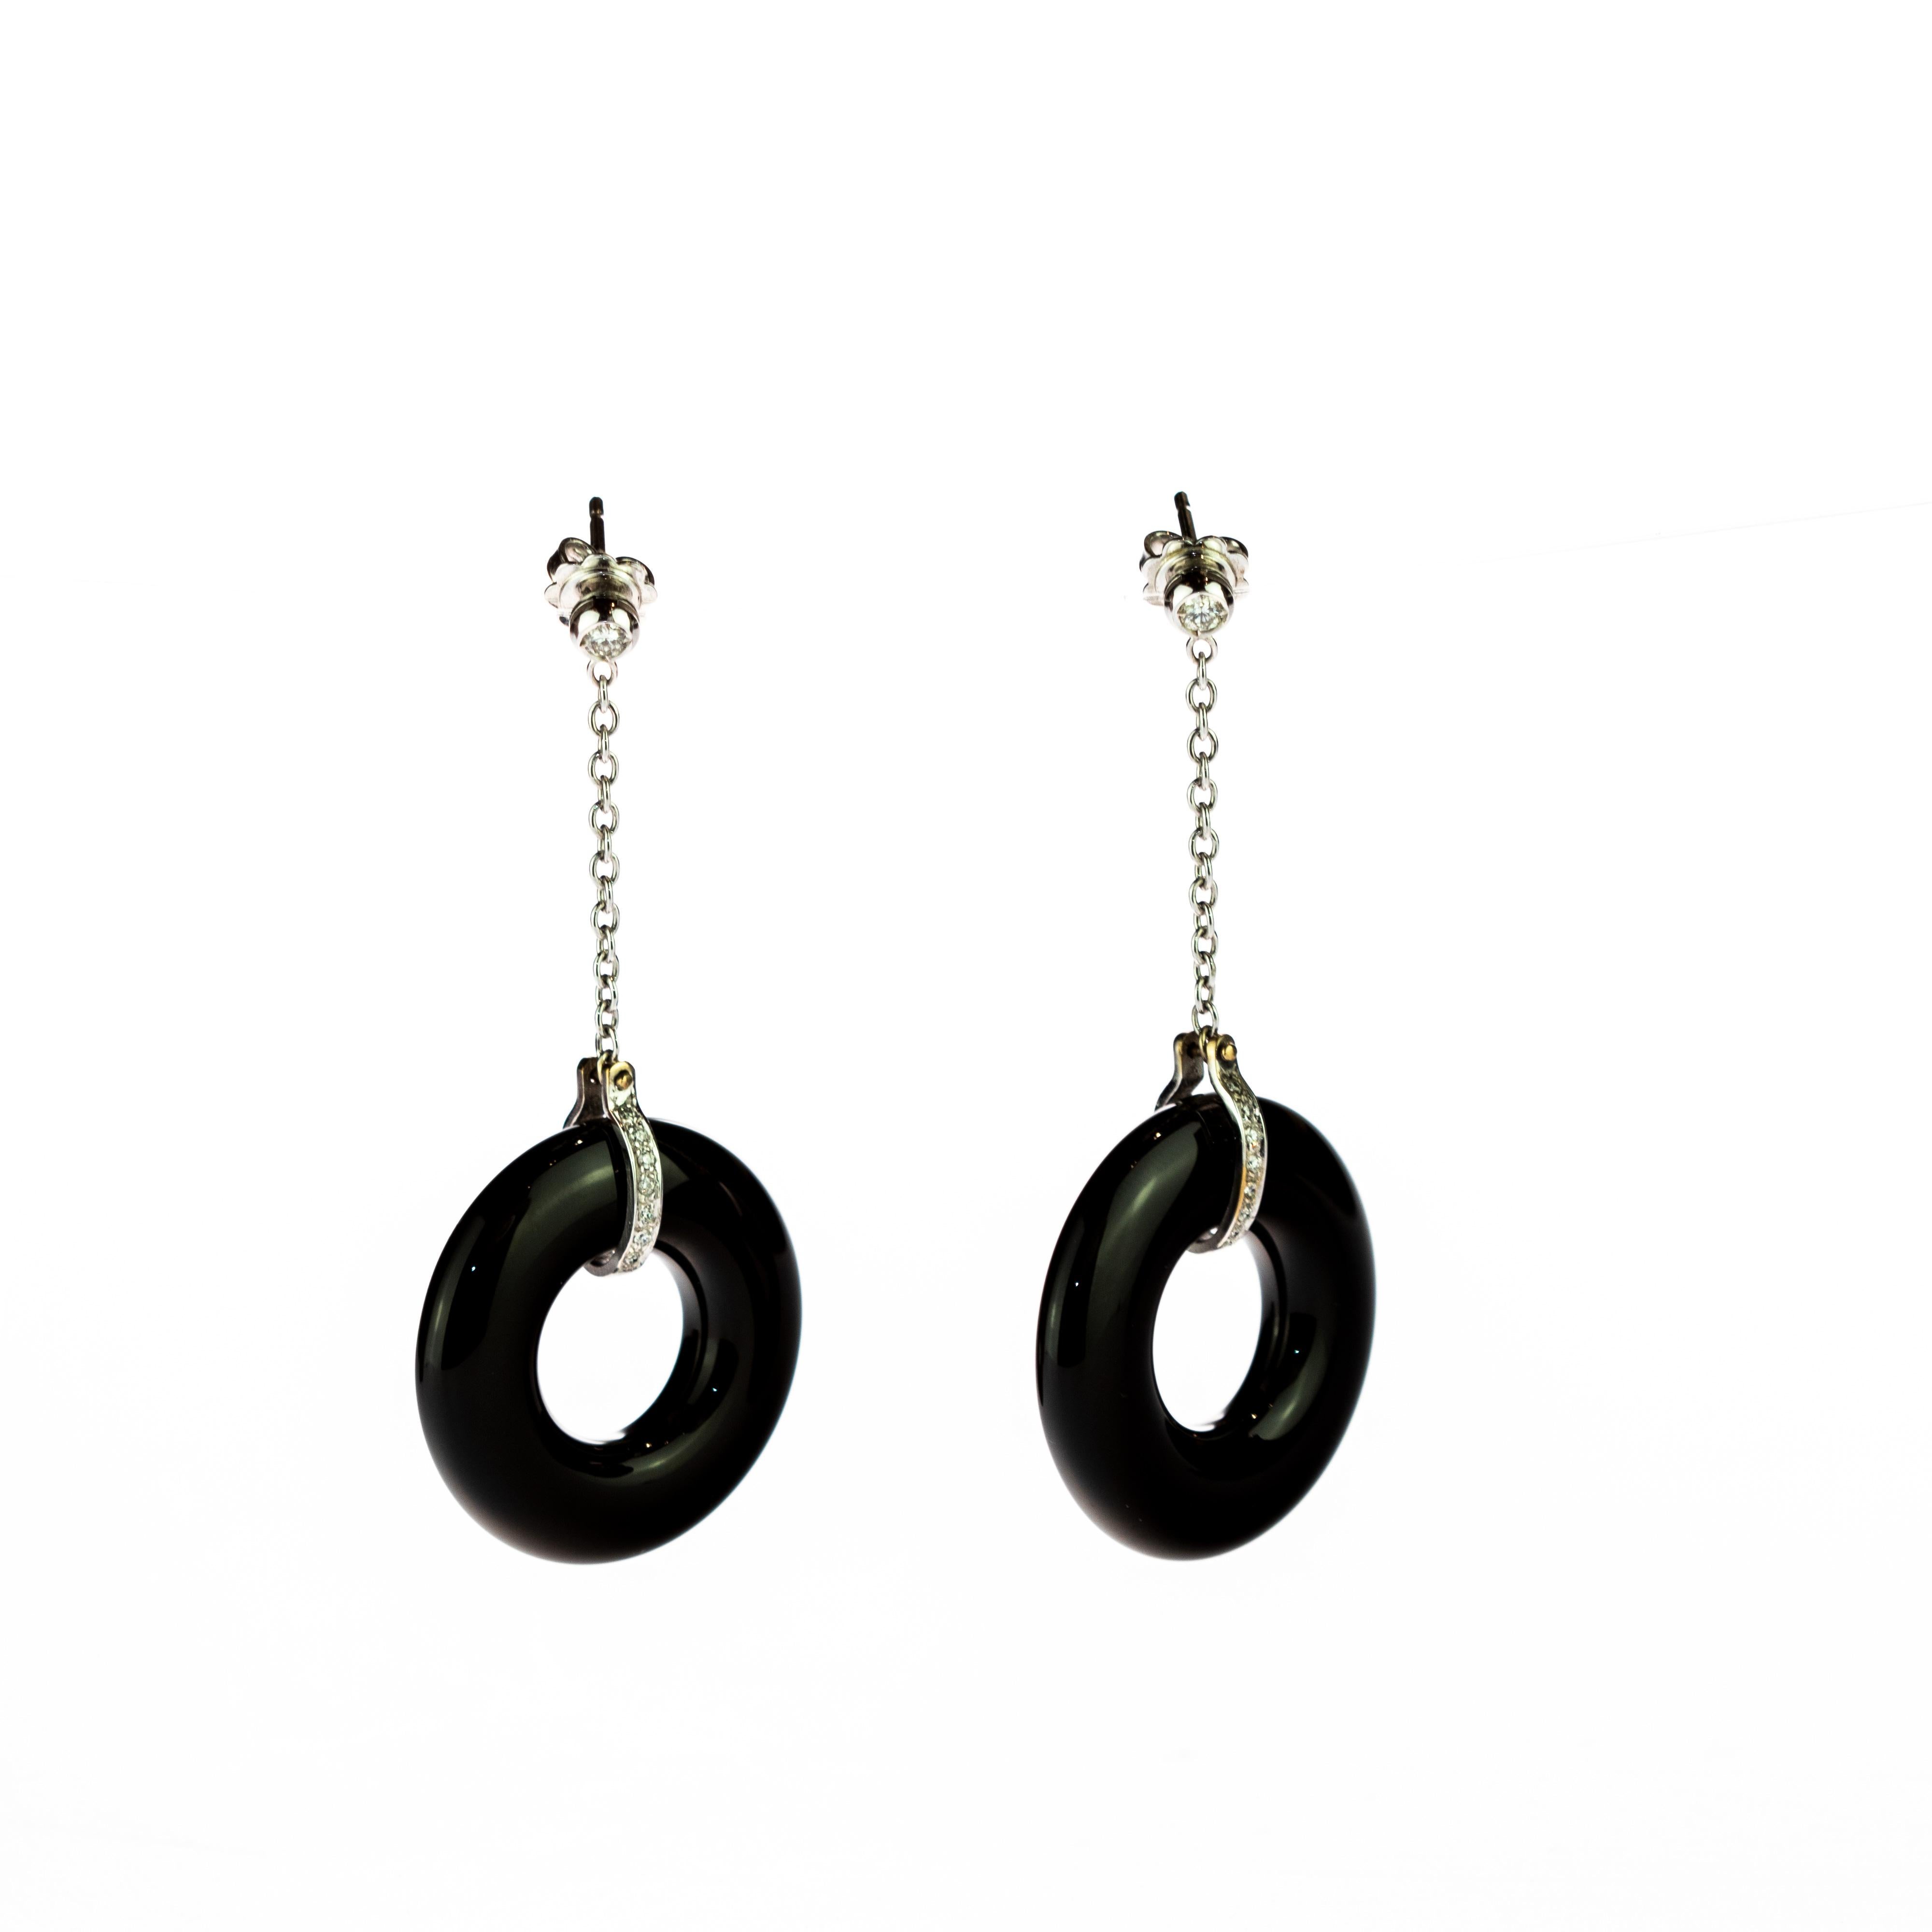 Unique and modern piece designed with a classy and elegant style. Diamond earings with a delicate 18k white gold chain wich ends in a black donut agate gem surounded by more diamonds.

This design is inspired by the winter nights in the north of